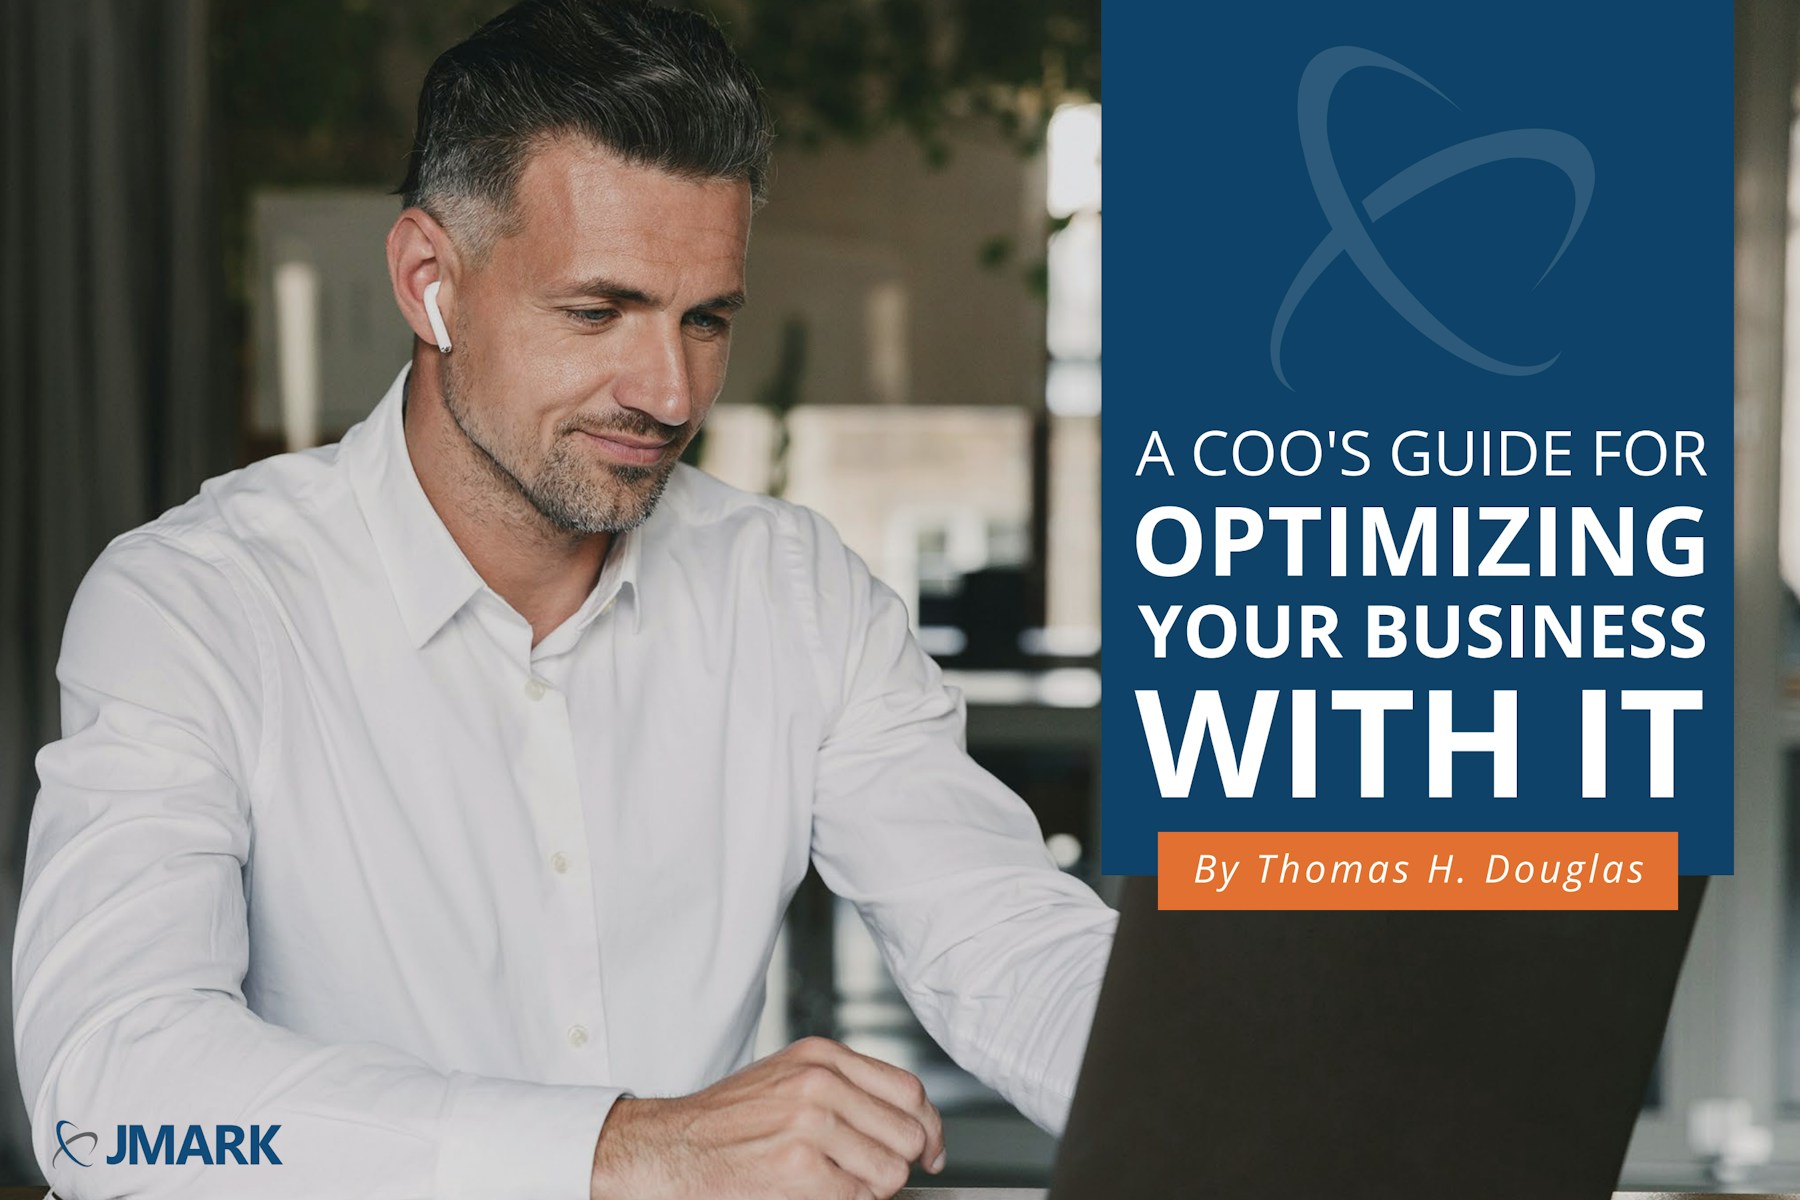 Preview: CO Os Guide to Optimizing your Business with IT